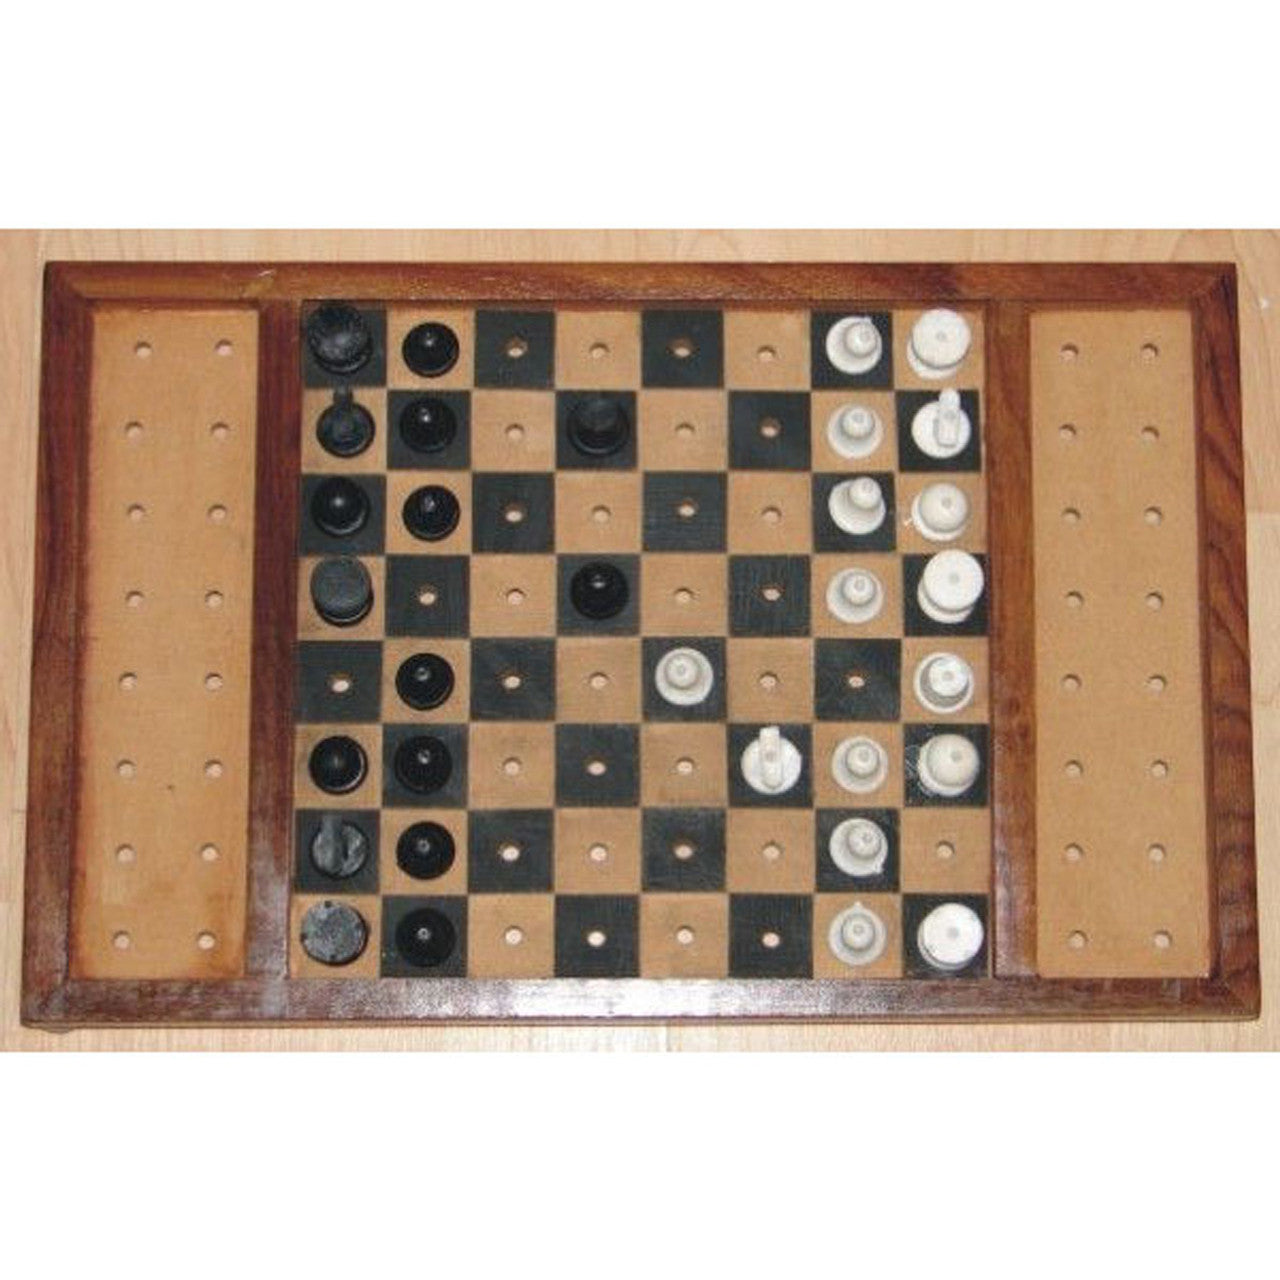 Chess set with black and white game pieces on a wooden chess board.